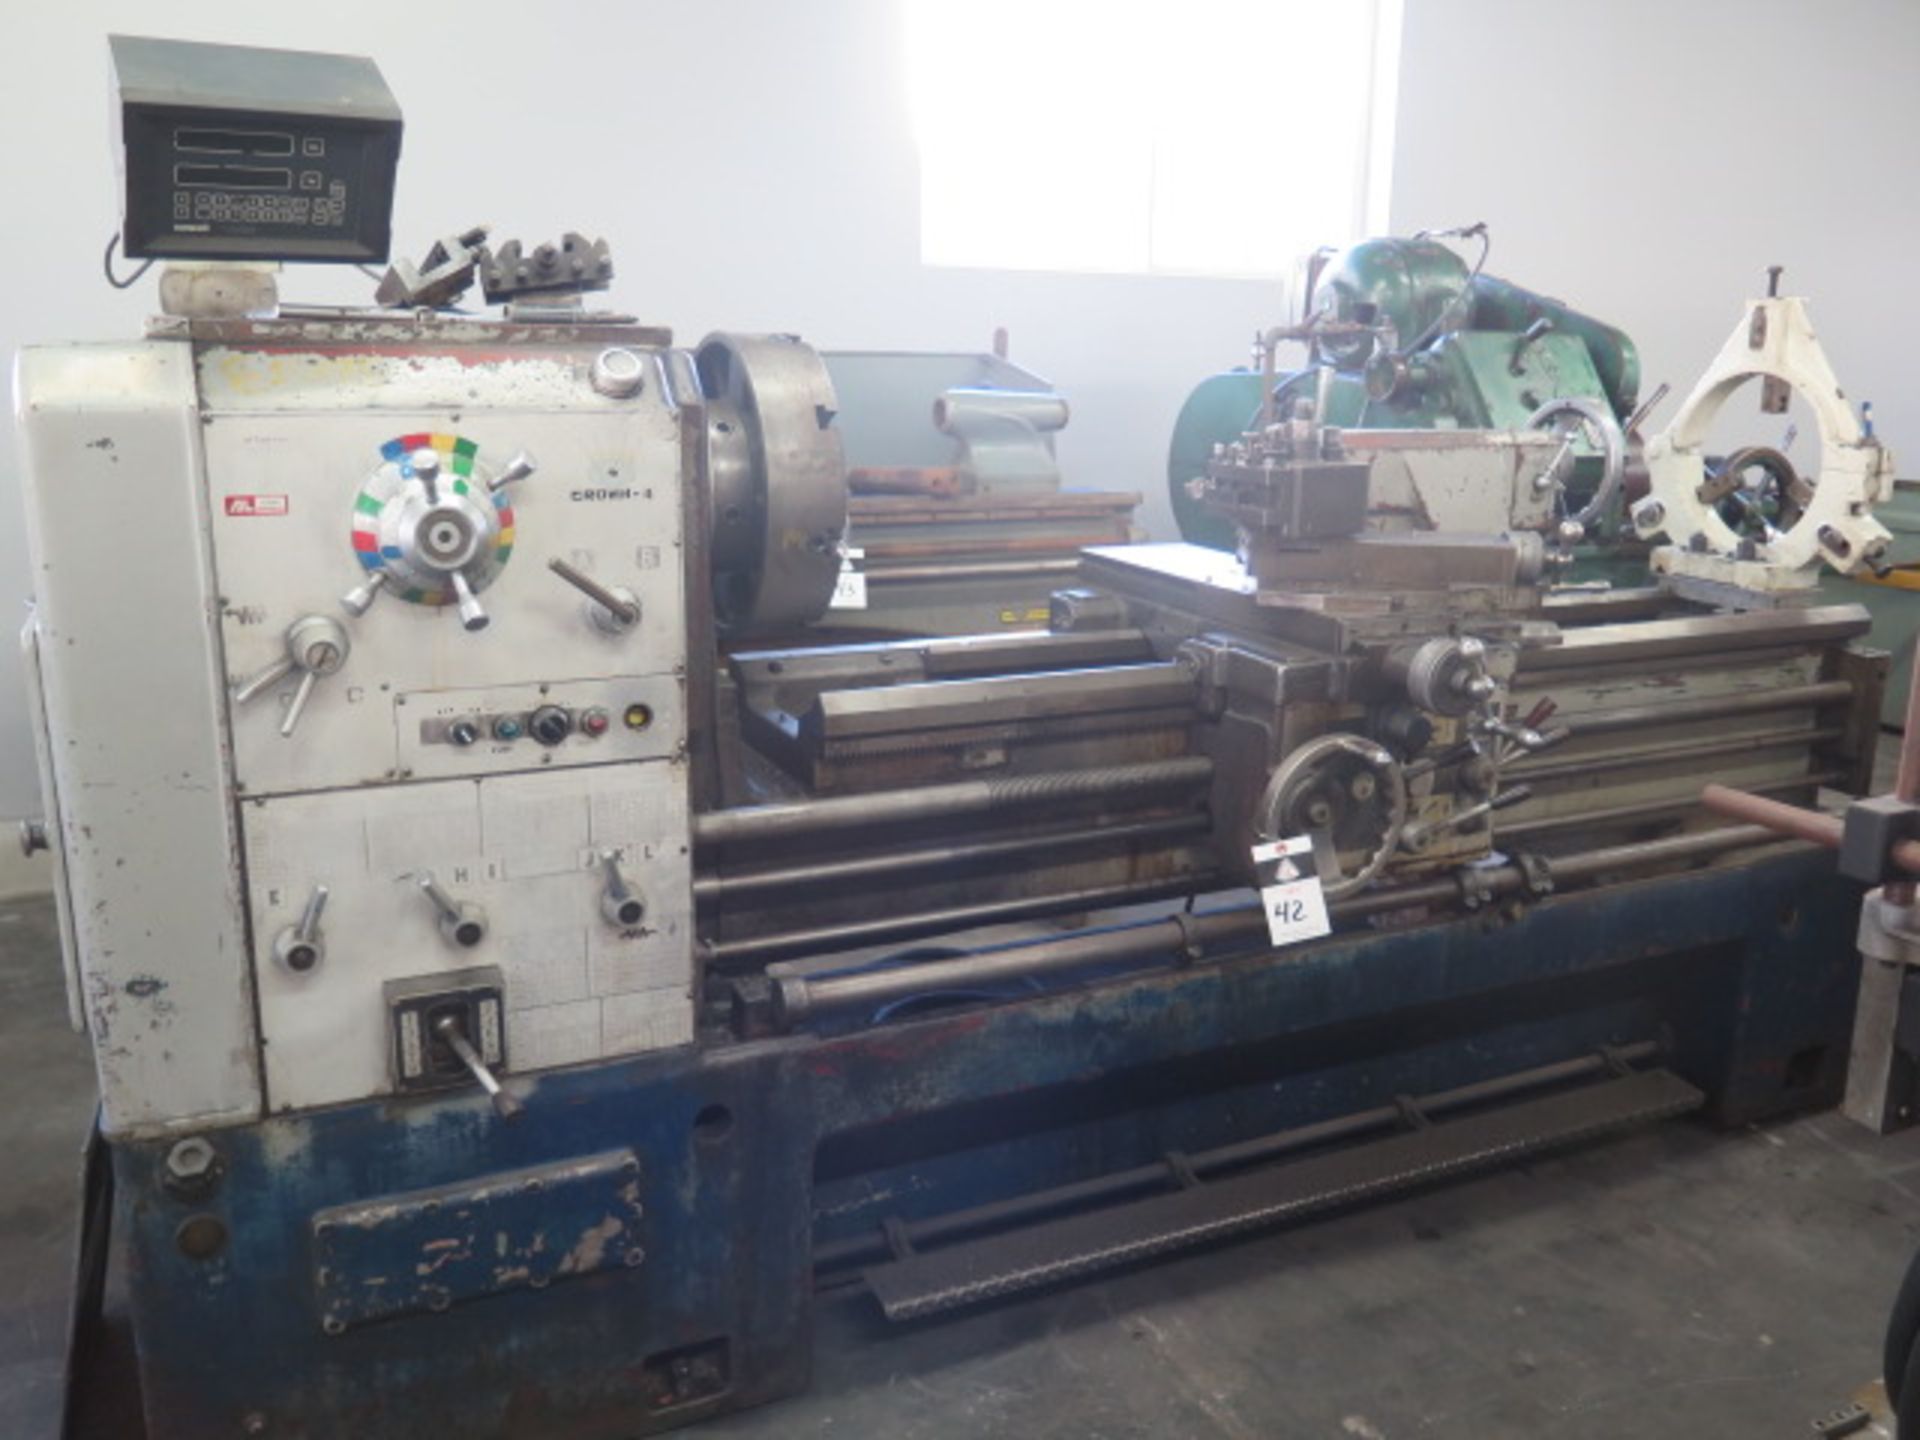 Crown 21” x 60” Geared Gap Bed Lathe w/ Newall Sapphire DRO, 11-1500 RPM, Inch/mm Thread, SOLD AS IS